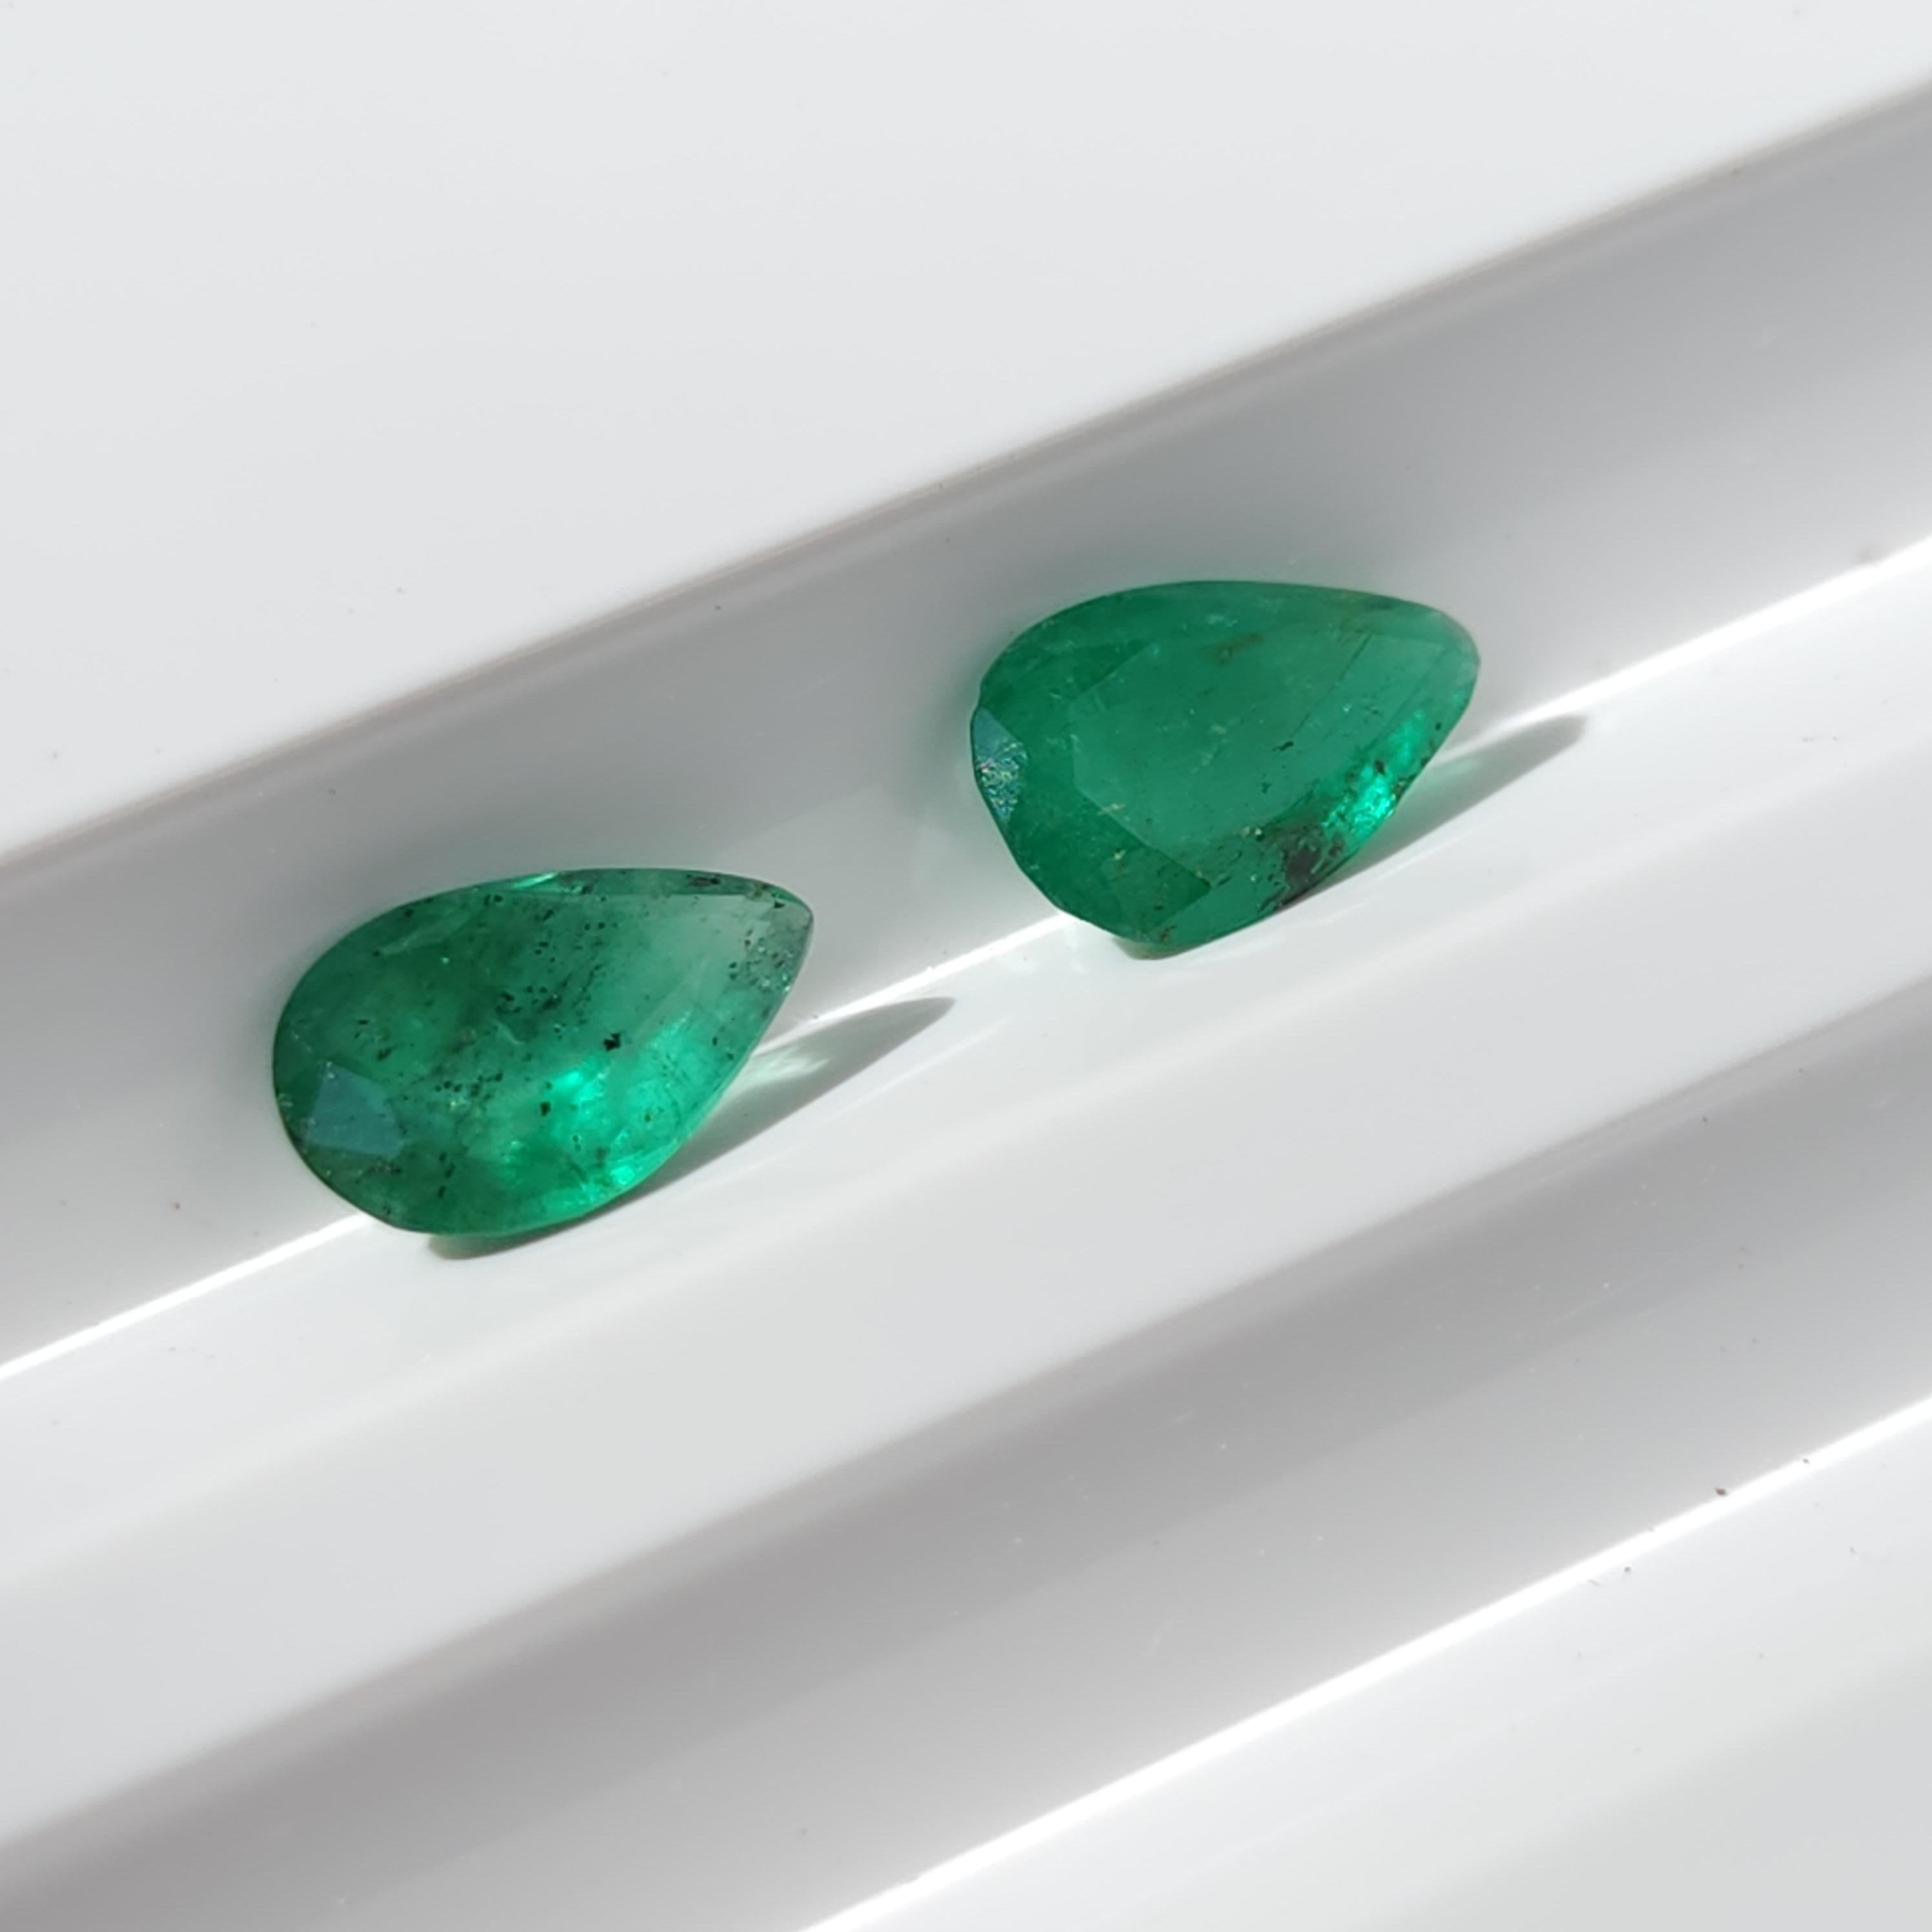 Exquisite 1.19ct Loose Pear Shape Emerald Gemstone

Product Description:

Delight in the enchanting radiance of our 1.19ct loose Pear Shape Emerald gemstone. Showcasing nature's unmatched artistry in every facet, this gem promises to illuminate your